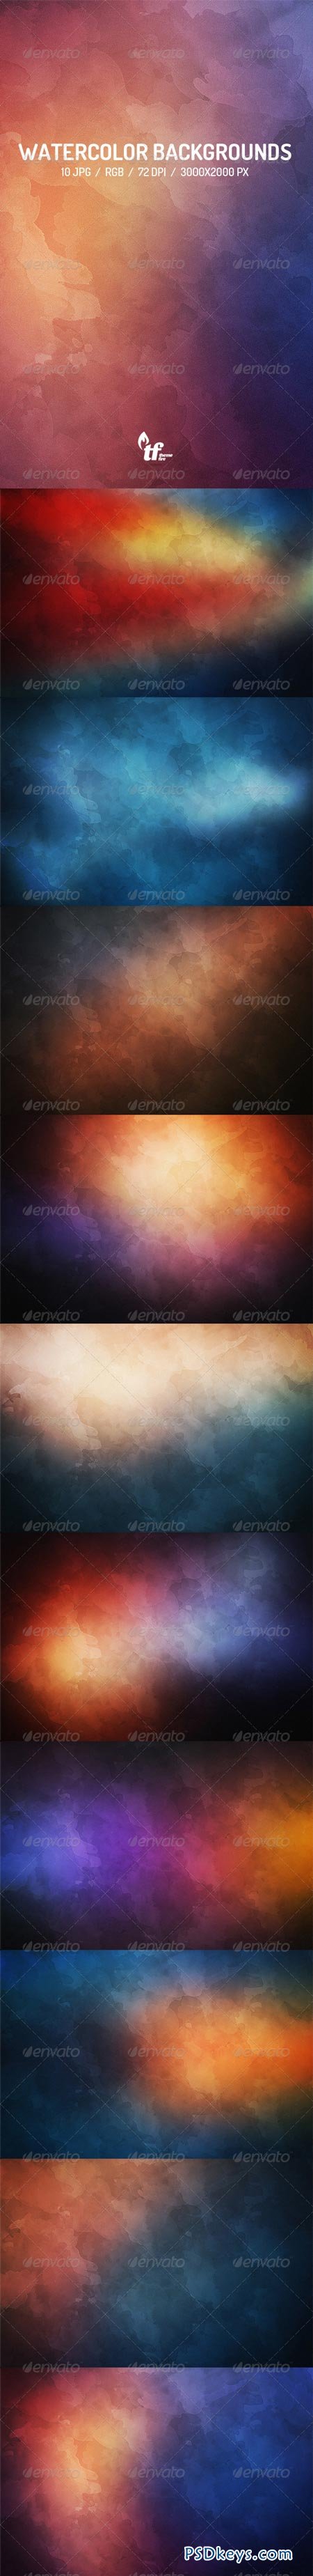 10 Watercolor Backgrounds 7839387